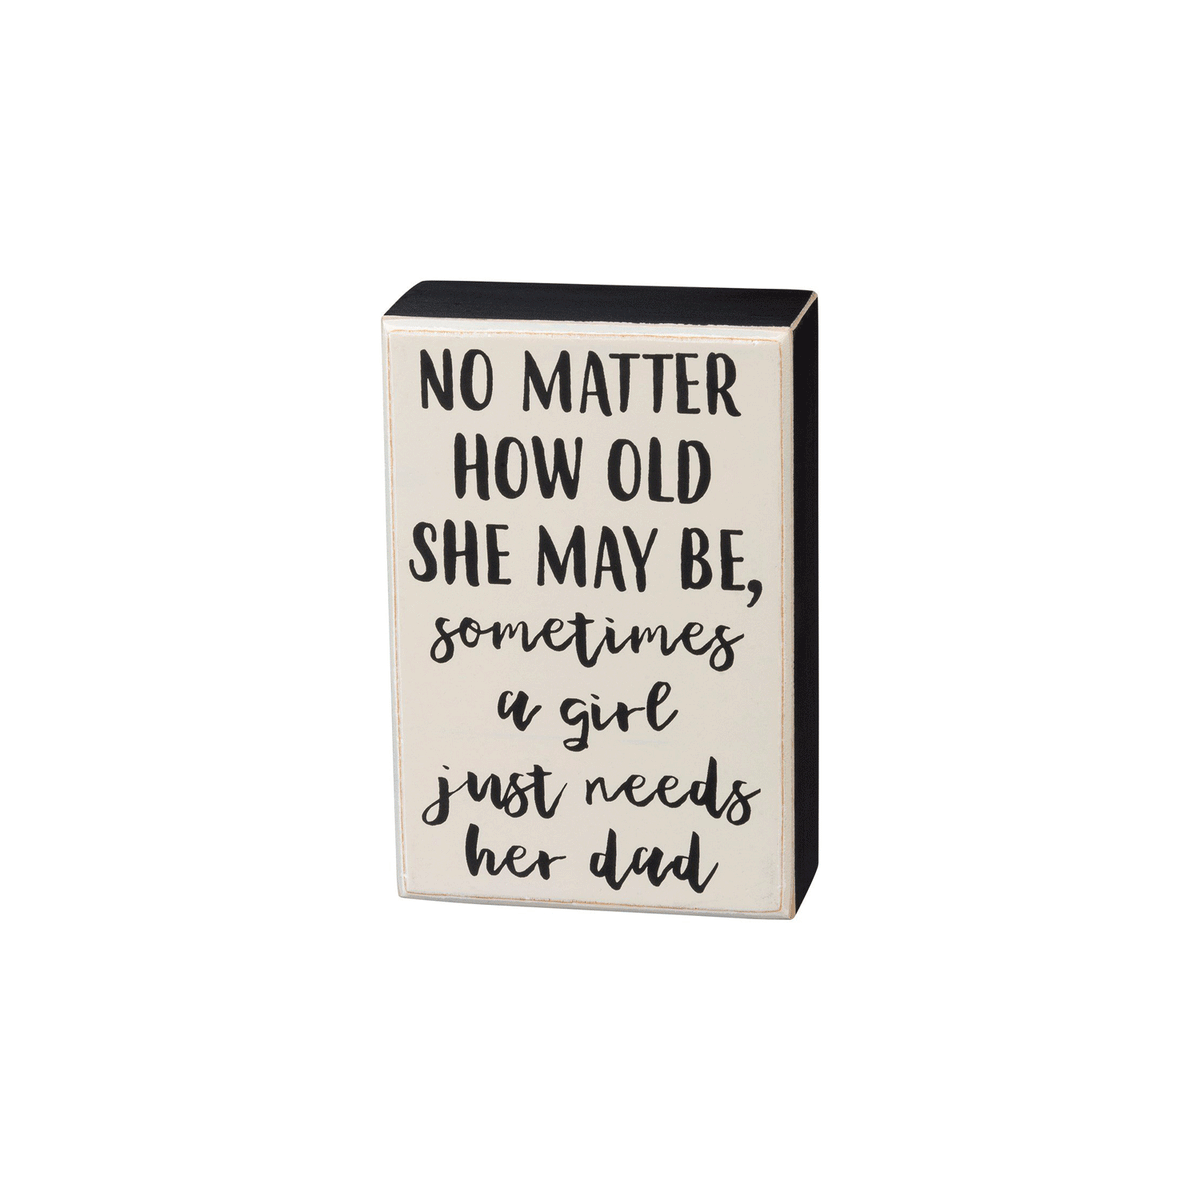 Black and white sign featuring the sentiment, "No matter how old she may be, sometimes a girl just needs her dad."